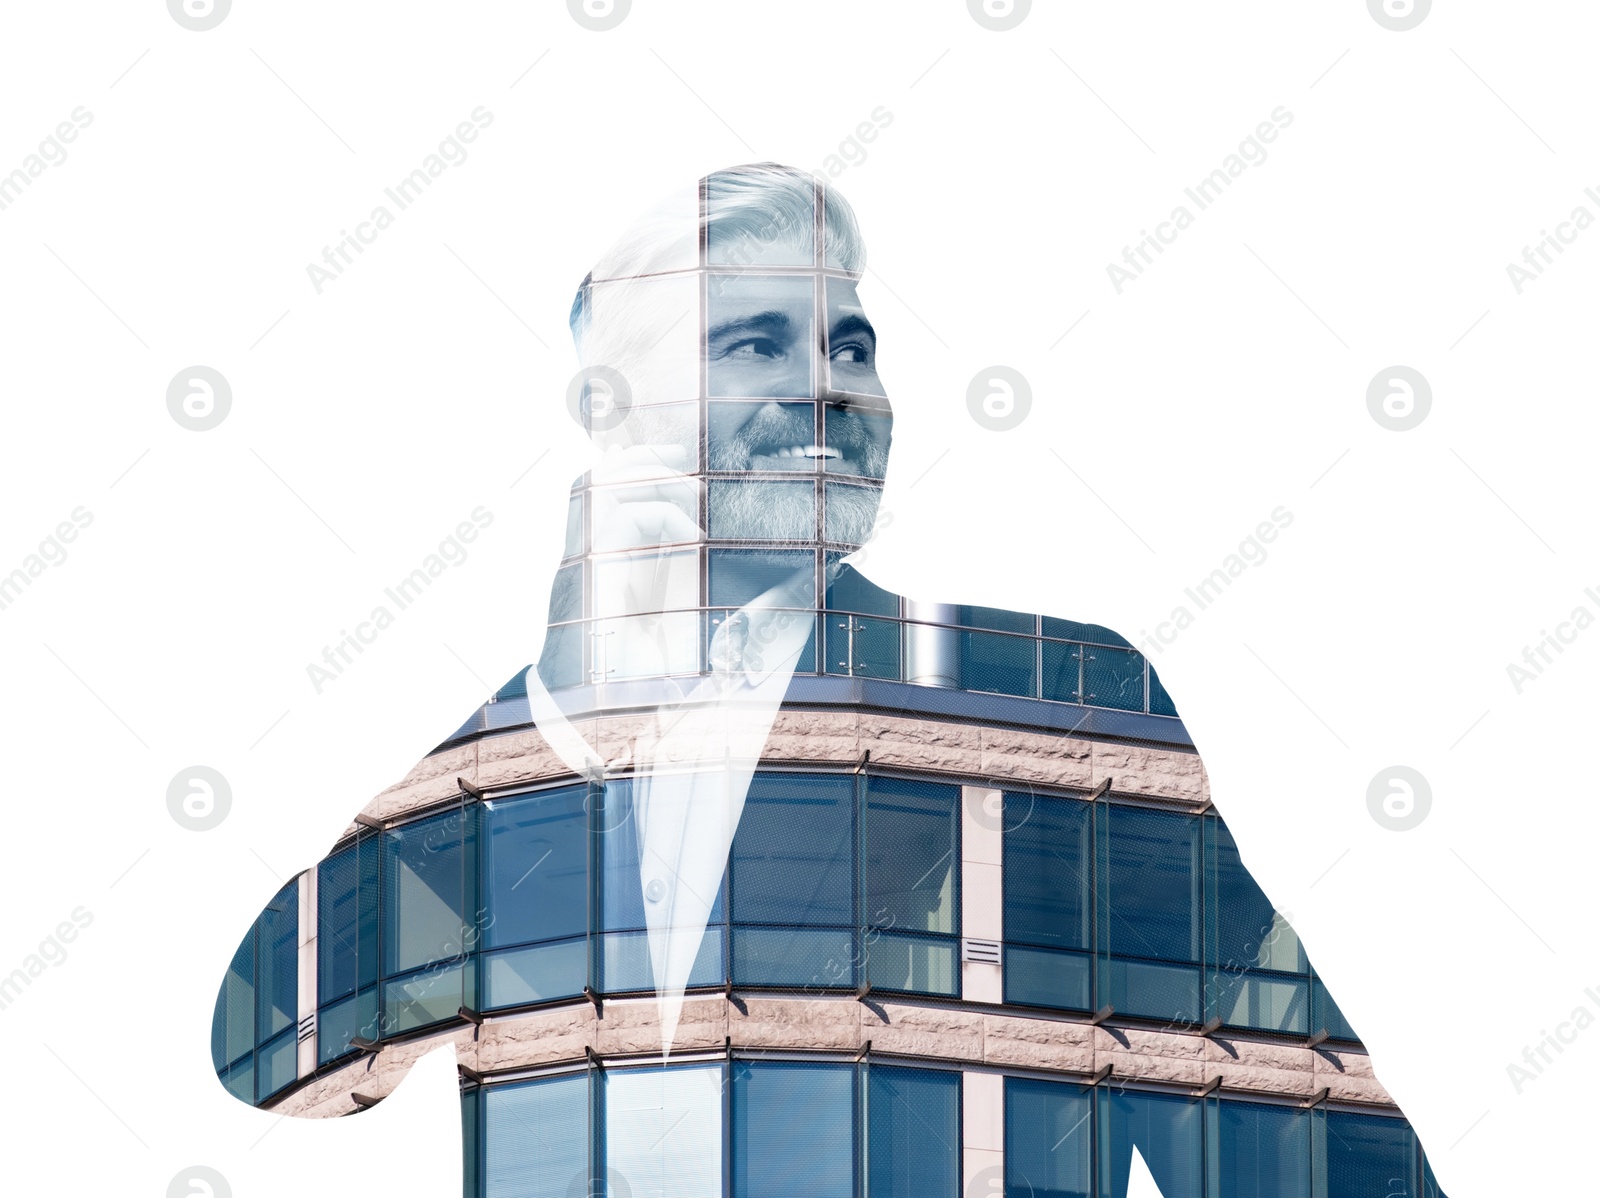 Image of Double exposure of businessman talking on phone and office building